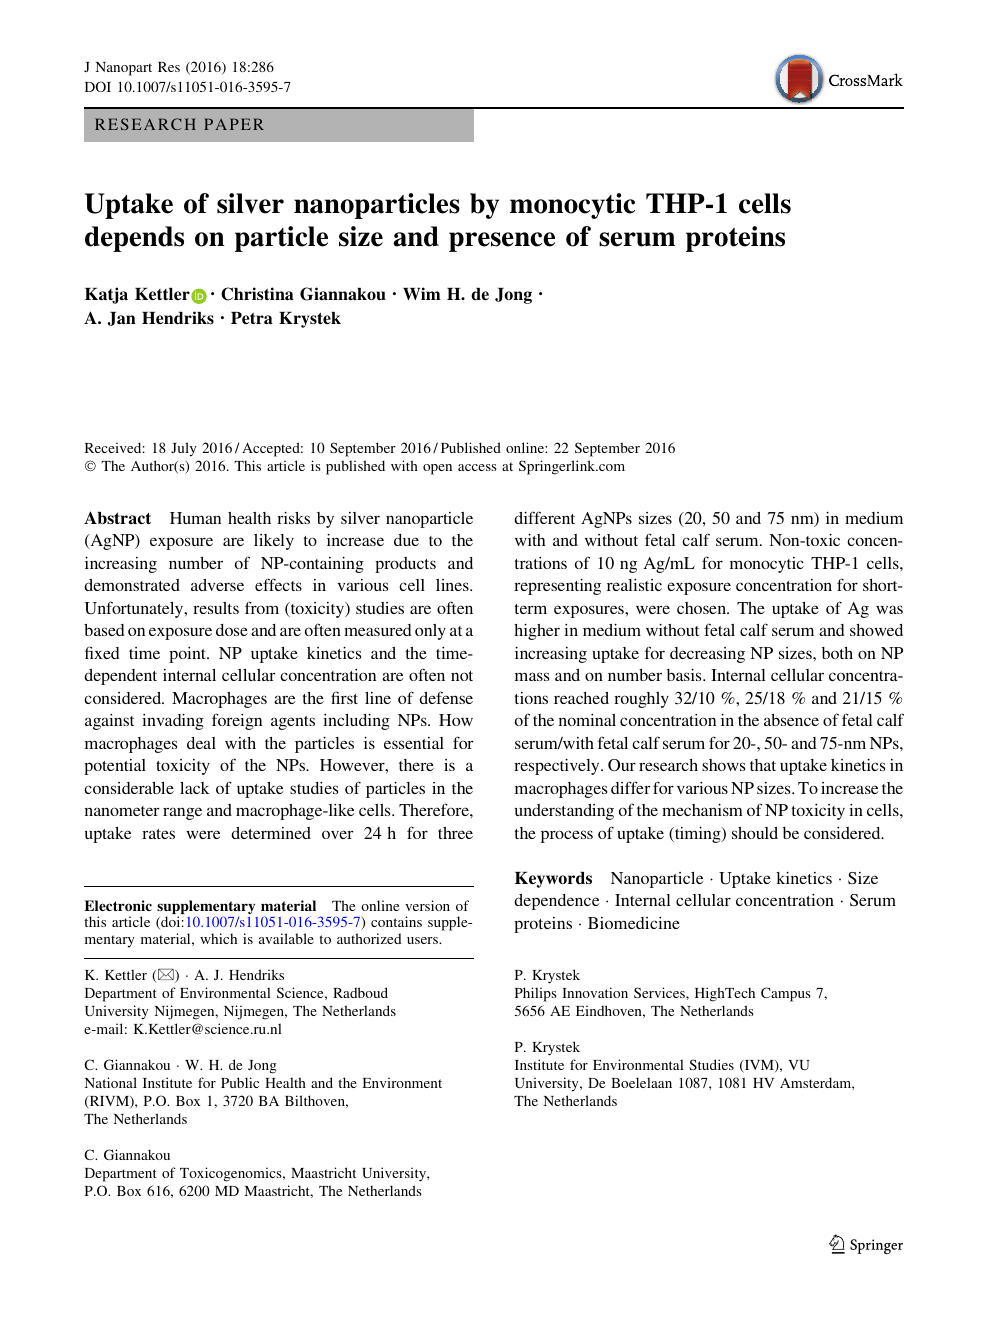 Uptake Of Silver Nanoparticles By Monocytic Thp 1 Cells Depends On Particle Size And Presence Of Serum Proteins Topic Of Research Paper In Nano Technology Download Scholarly Article Pdf And Read For Free